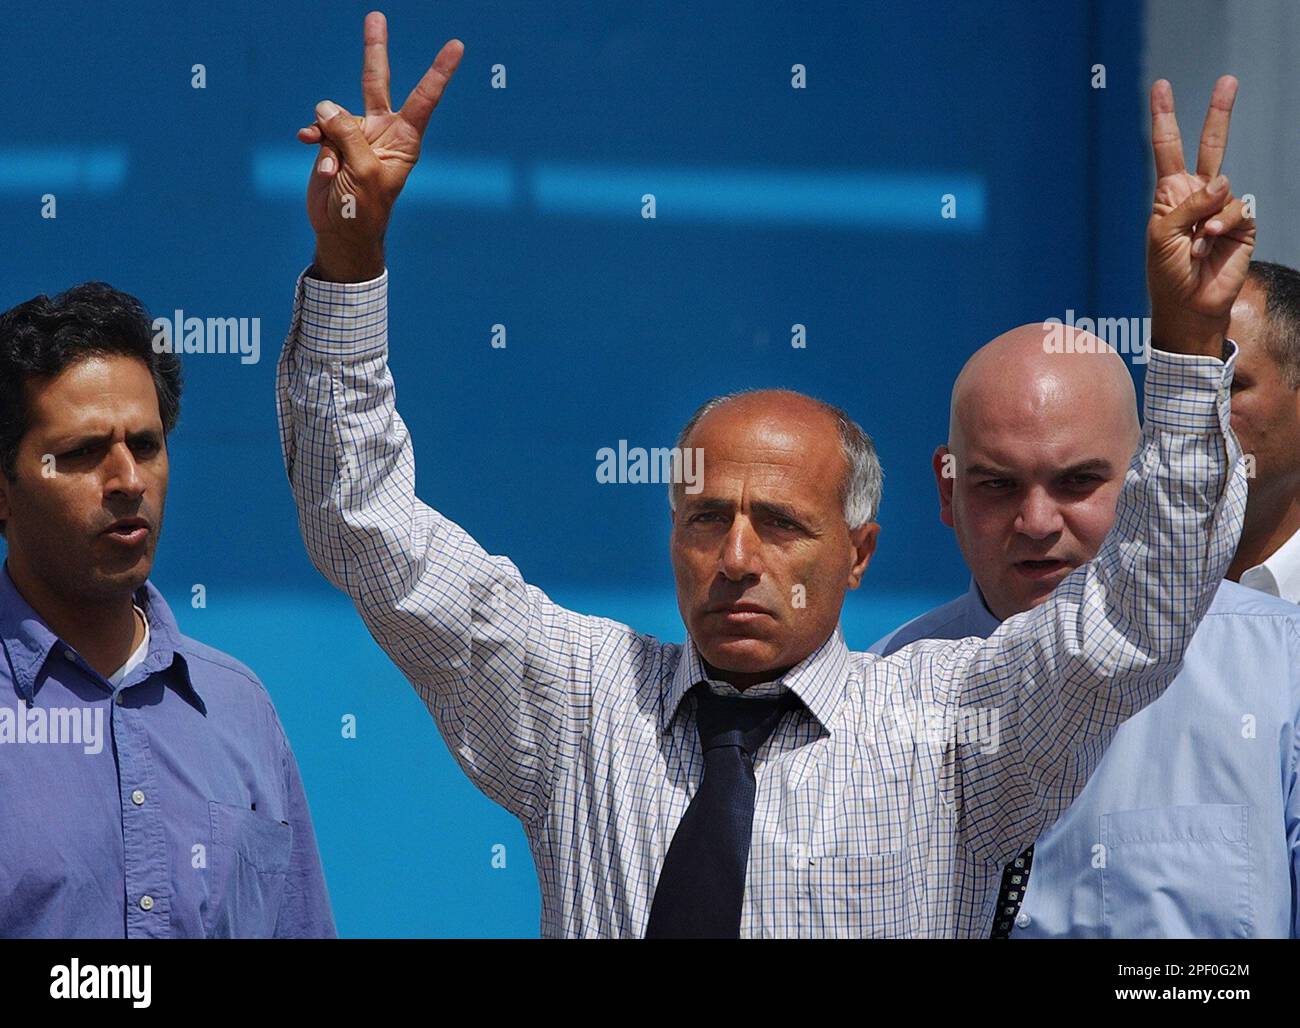 Israeli nuclear whistleblower Mordechai Vanunu gestures as he stands next to his brother Mail, left, outside Shikma Prison following his release in the coastal city of Ashkelon, Israel Wednesday, April 21, 2004. (AP Photo/Ariel Schalit) Stock Photo